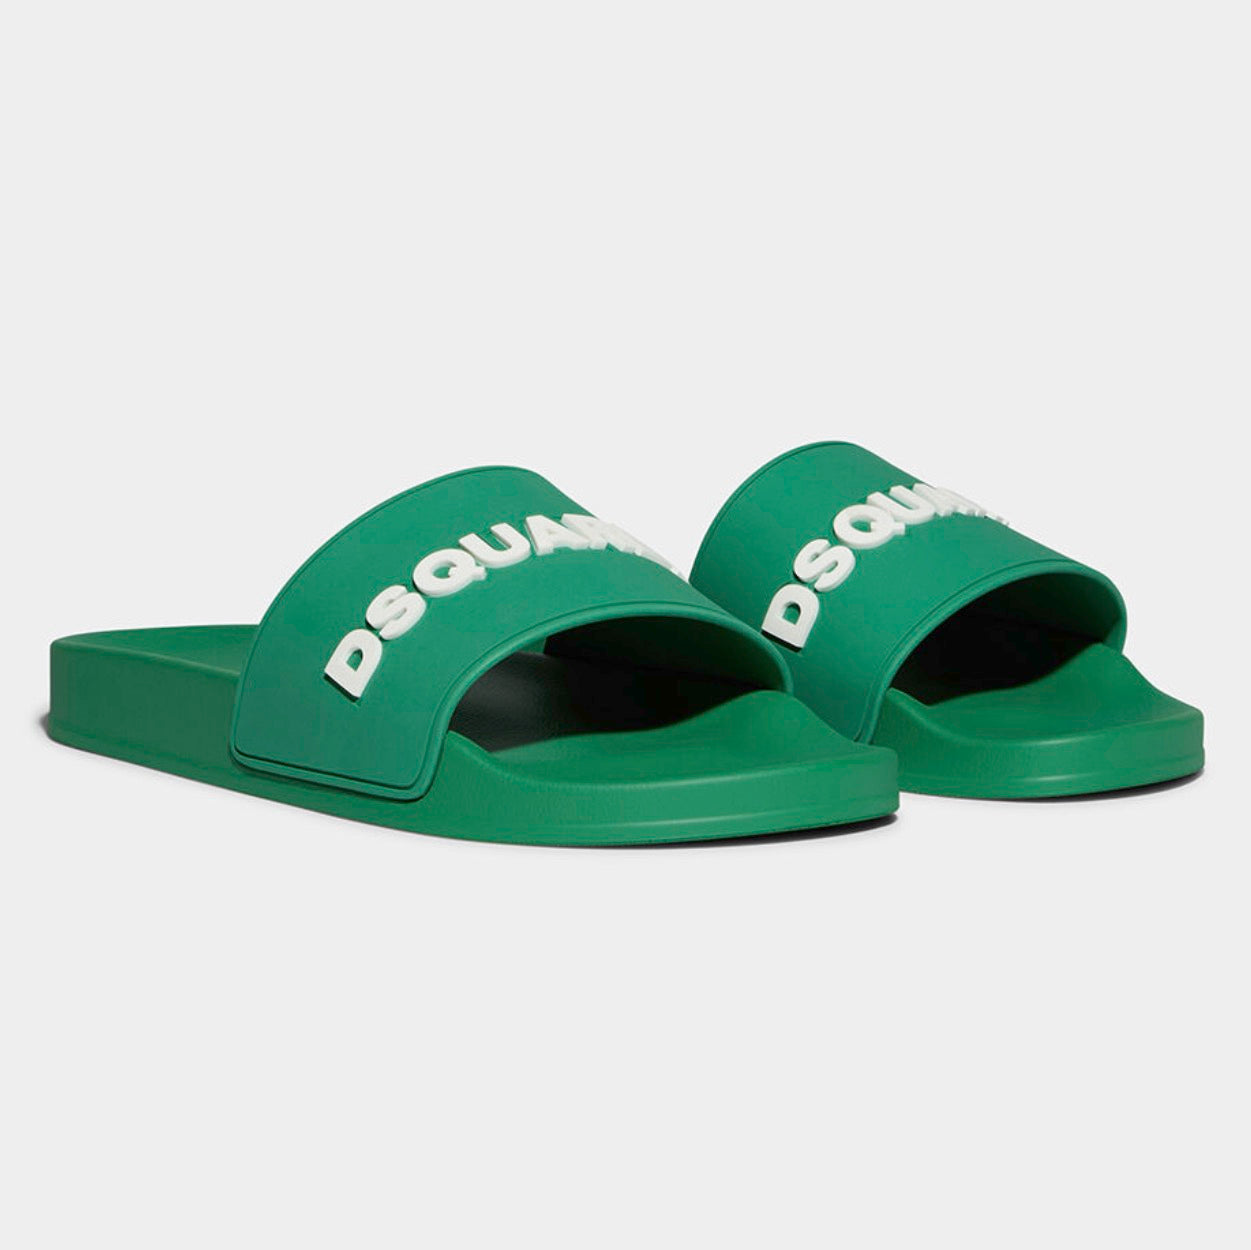 Treat yourself to a new eye-catching pair of footwear with the Dsquared2 Logo Slides. These block-colour slides feature a raised “DSQUARED2” logo on the front, elevating them from a simple wardrobe staple. These practical yet fun shoes are easy to slip on and look great paired with distressed jeans and chunky socks for a laidback look. 